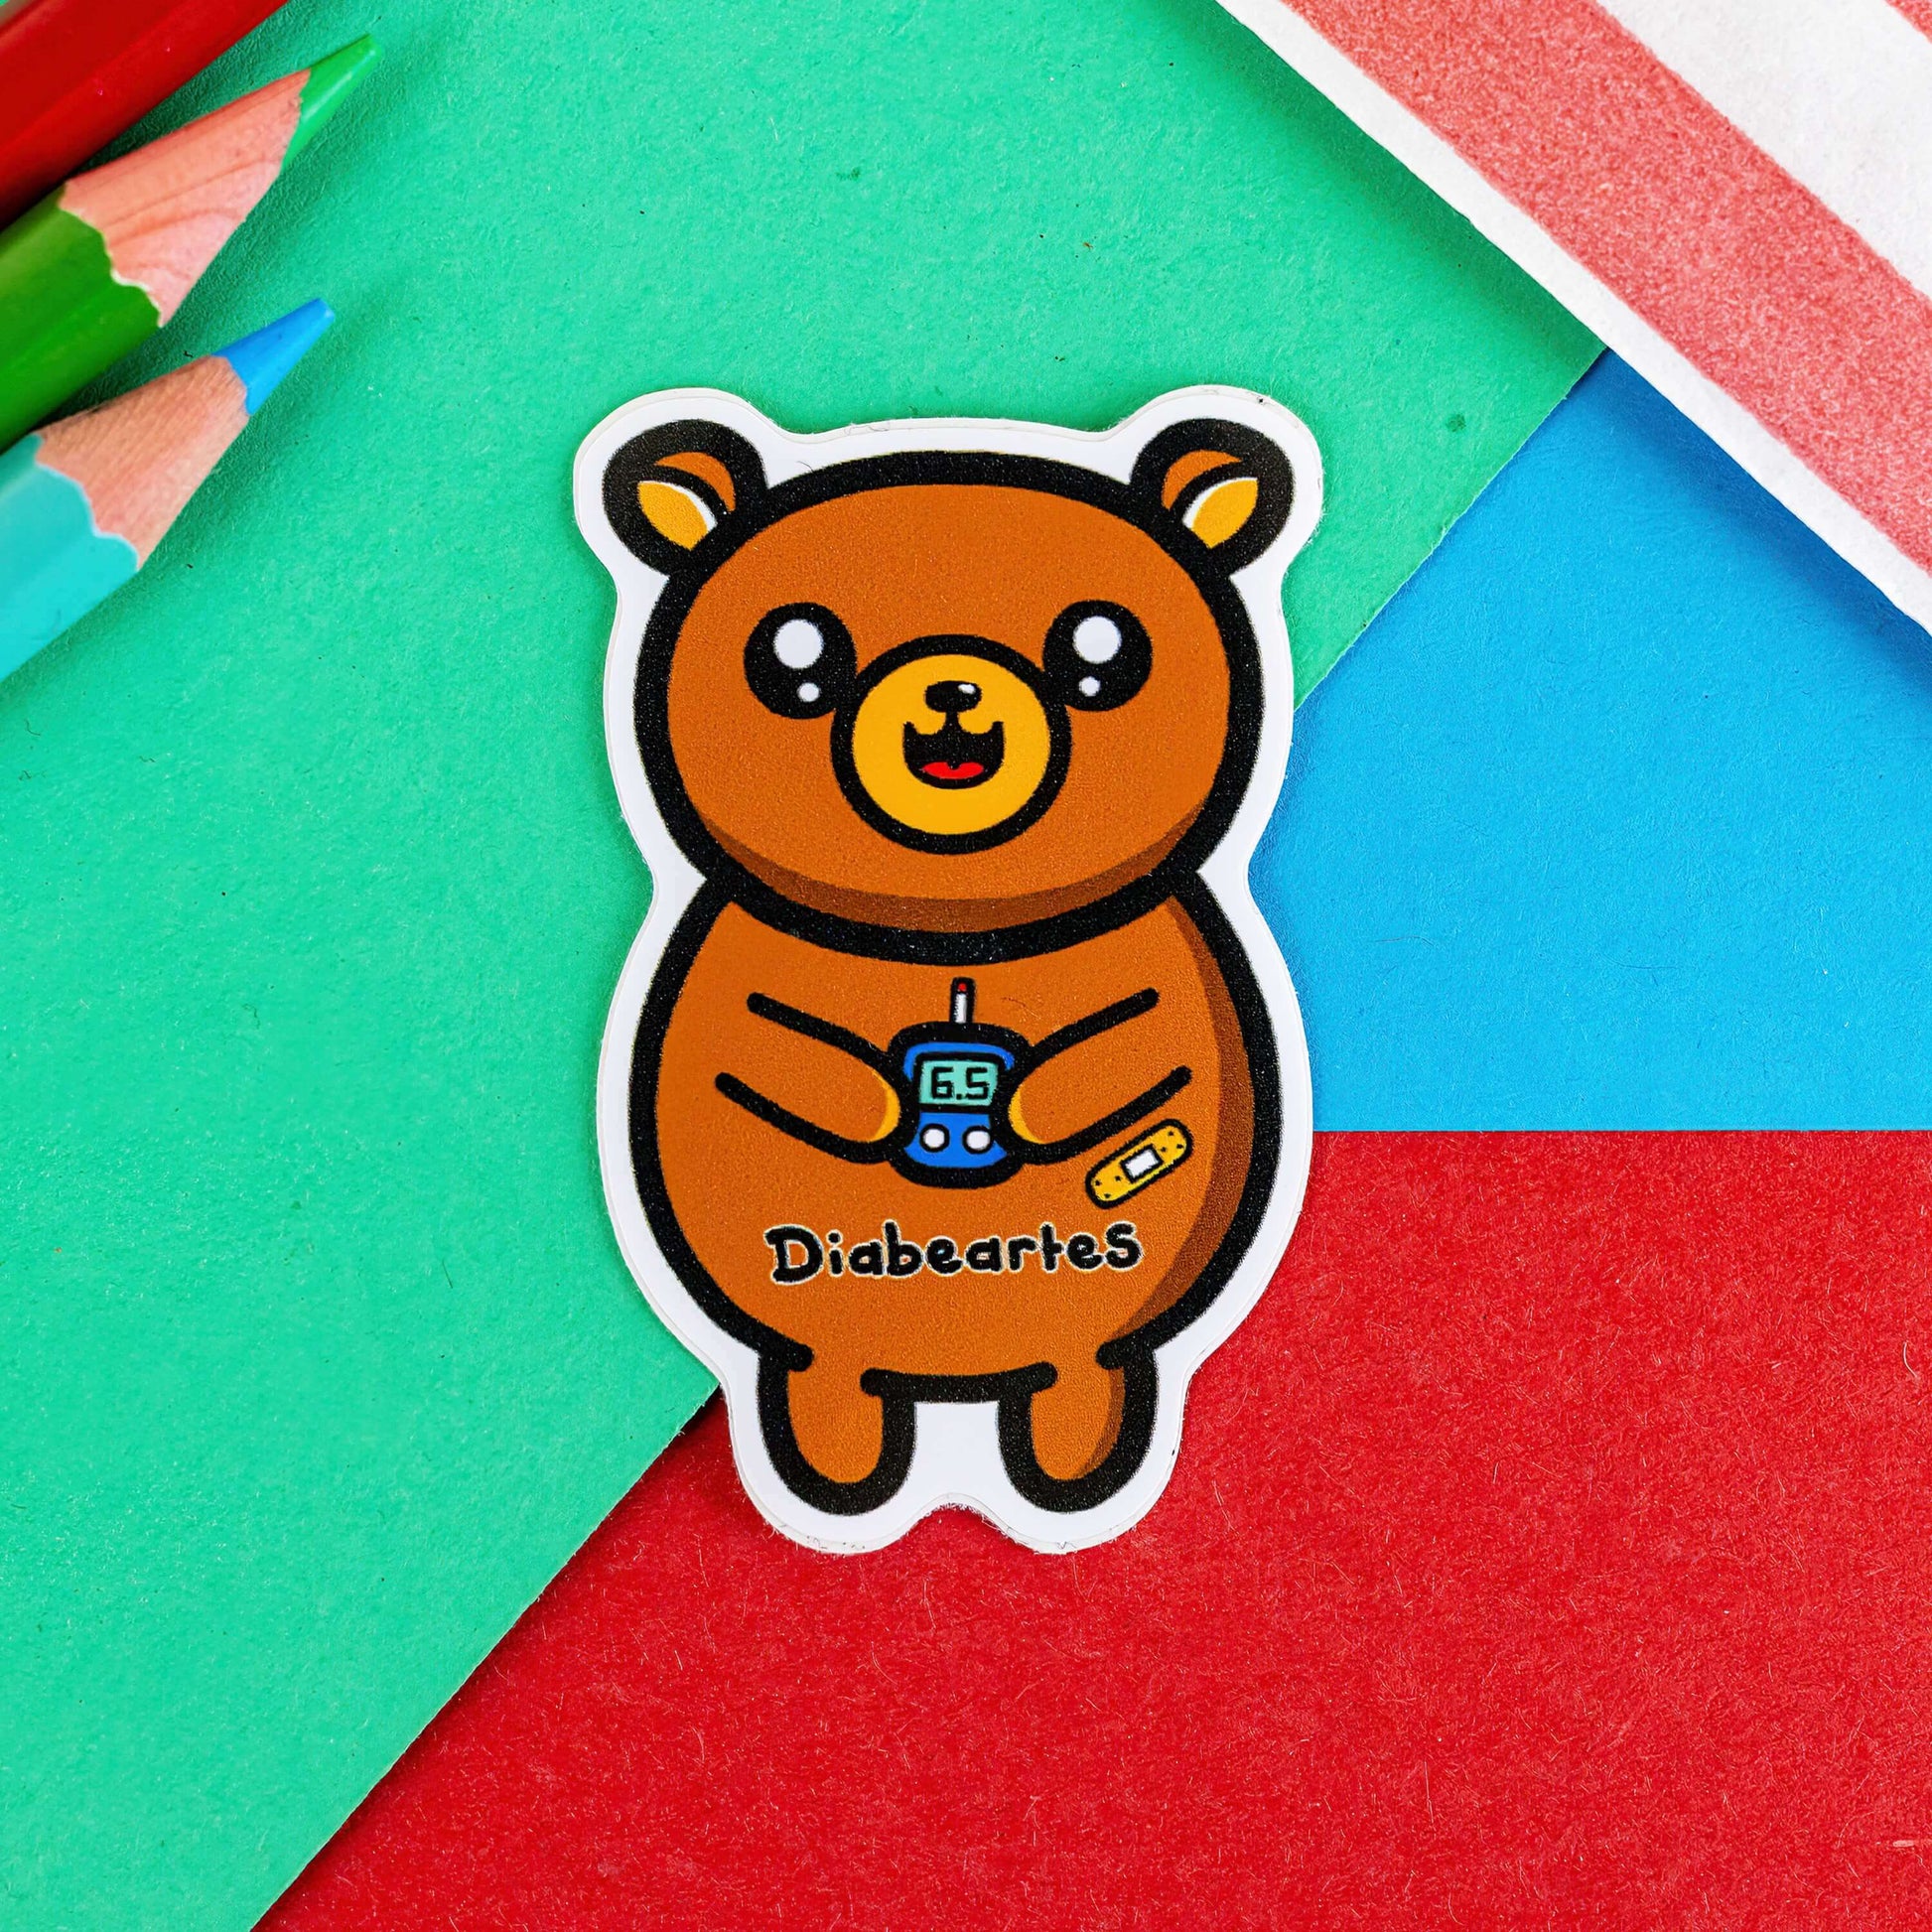 The Diabeartes Sticker - Diabetes on a red, green and blue background with colouring pencils and a red stripe candy bag. The brown bear shaped sticker is smiling holding a blood glucose reader with a plaster on its arm, across its tummy reads 'diabeartes' in black. The design is raising awareness for those with type 1 diabetes and type 2 diabetes.